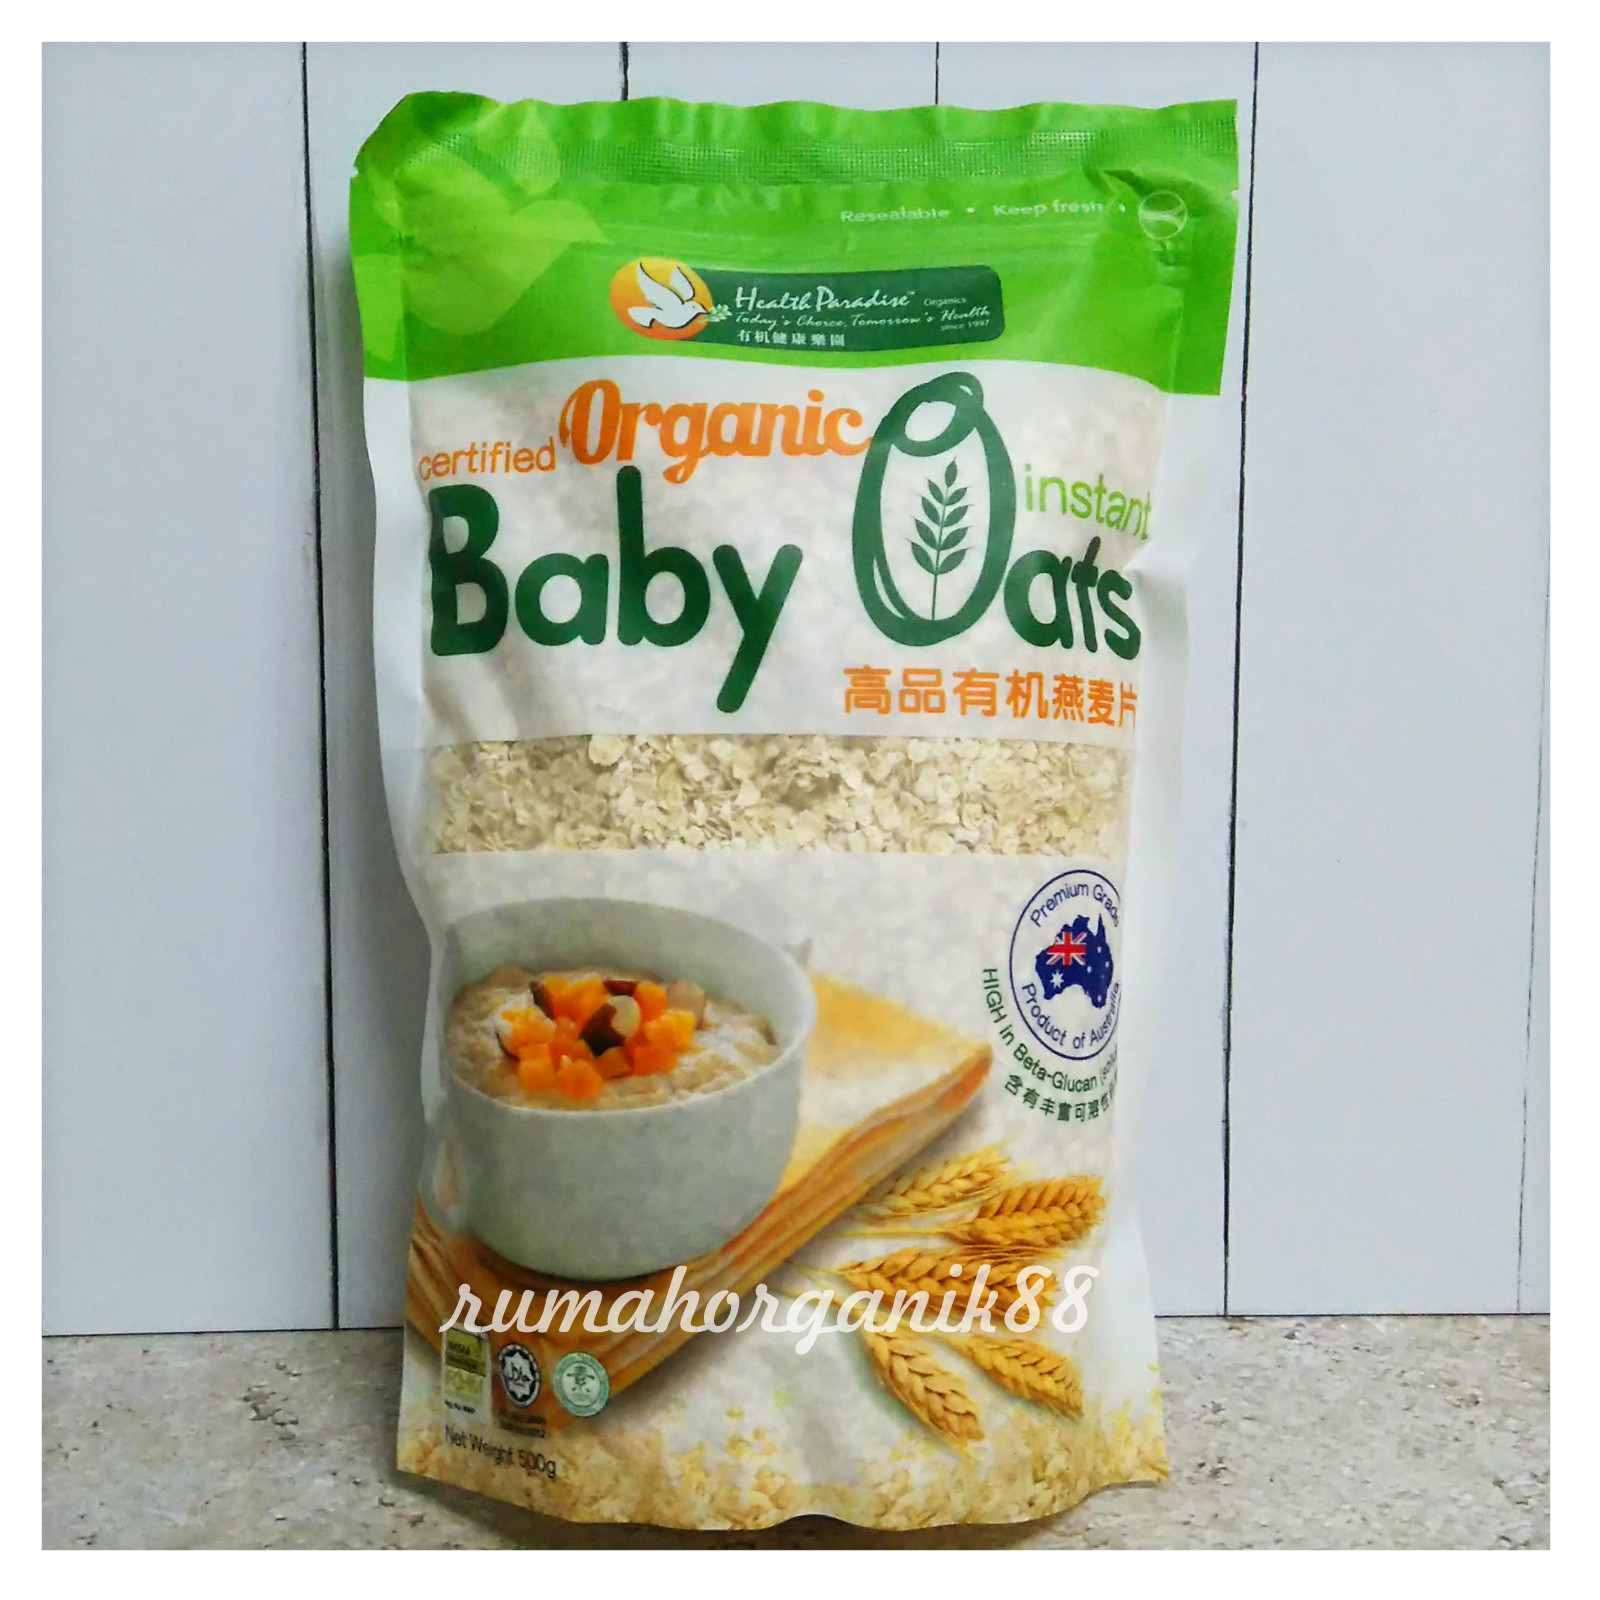 Oats For Baby
 HP Org Instant baby oats 05